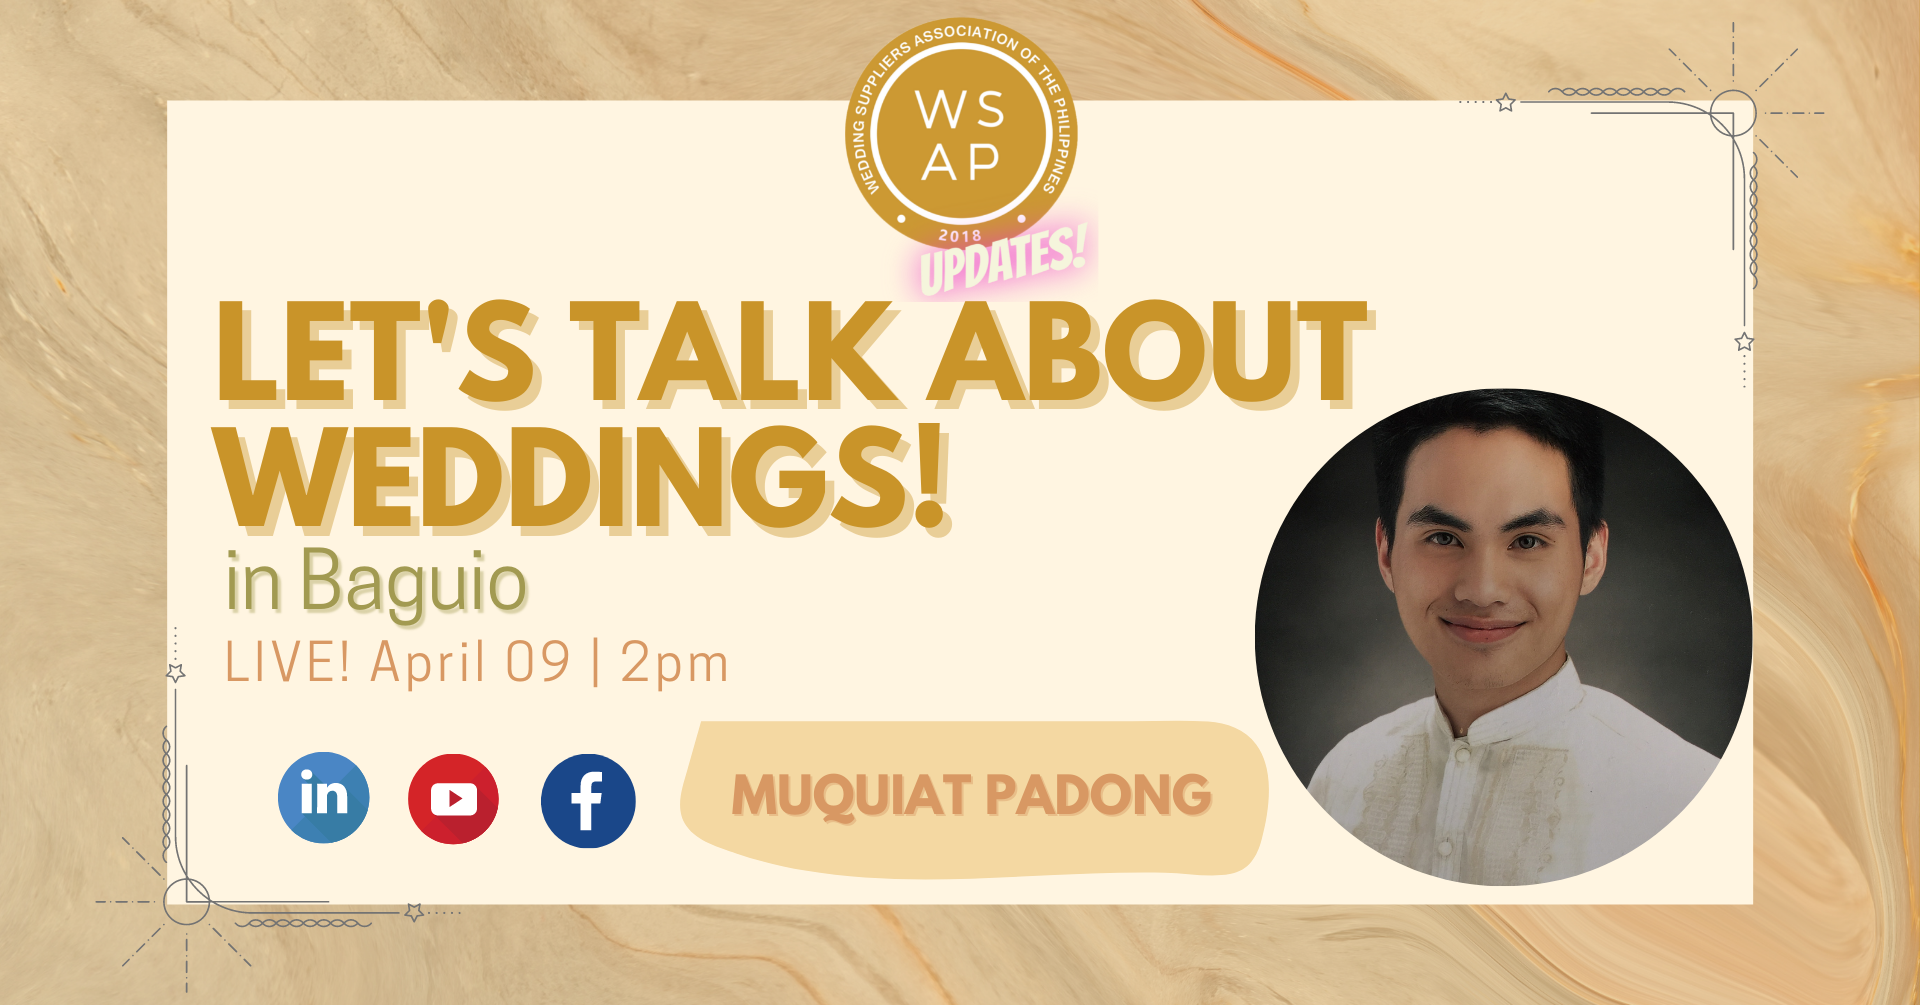 Let's Talk About Weddings in Baguio with Muquiat Padong